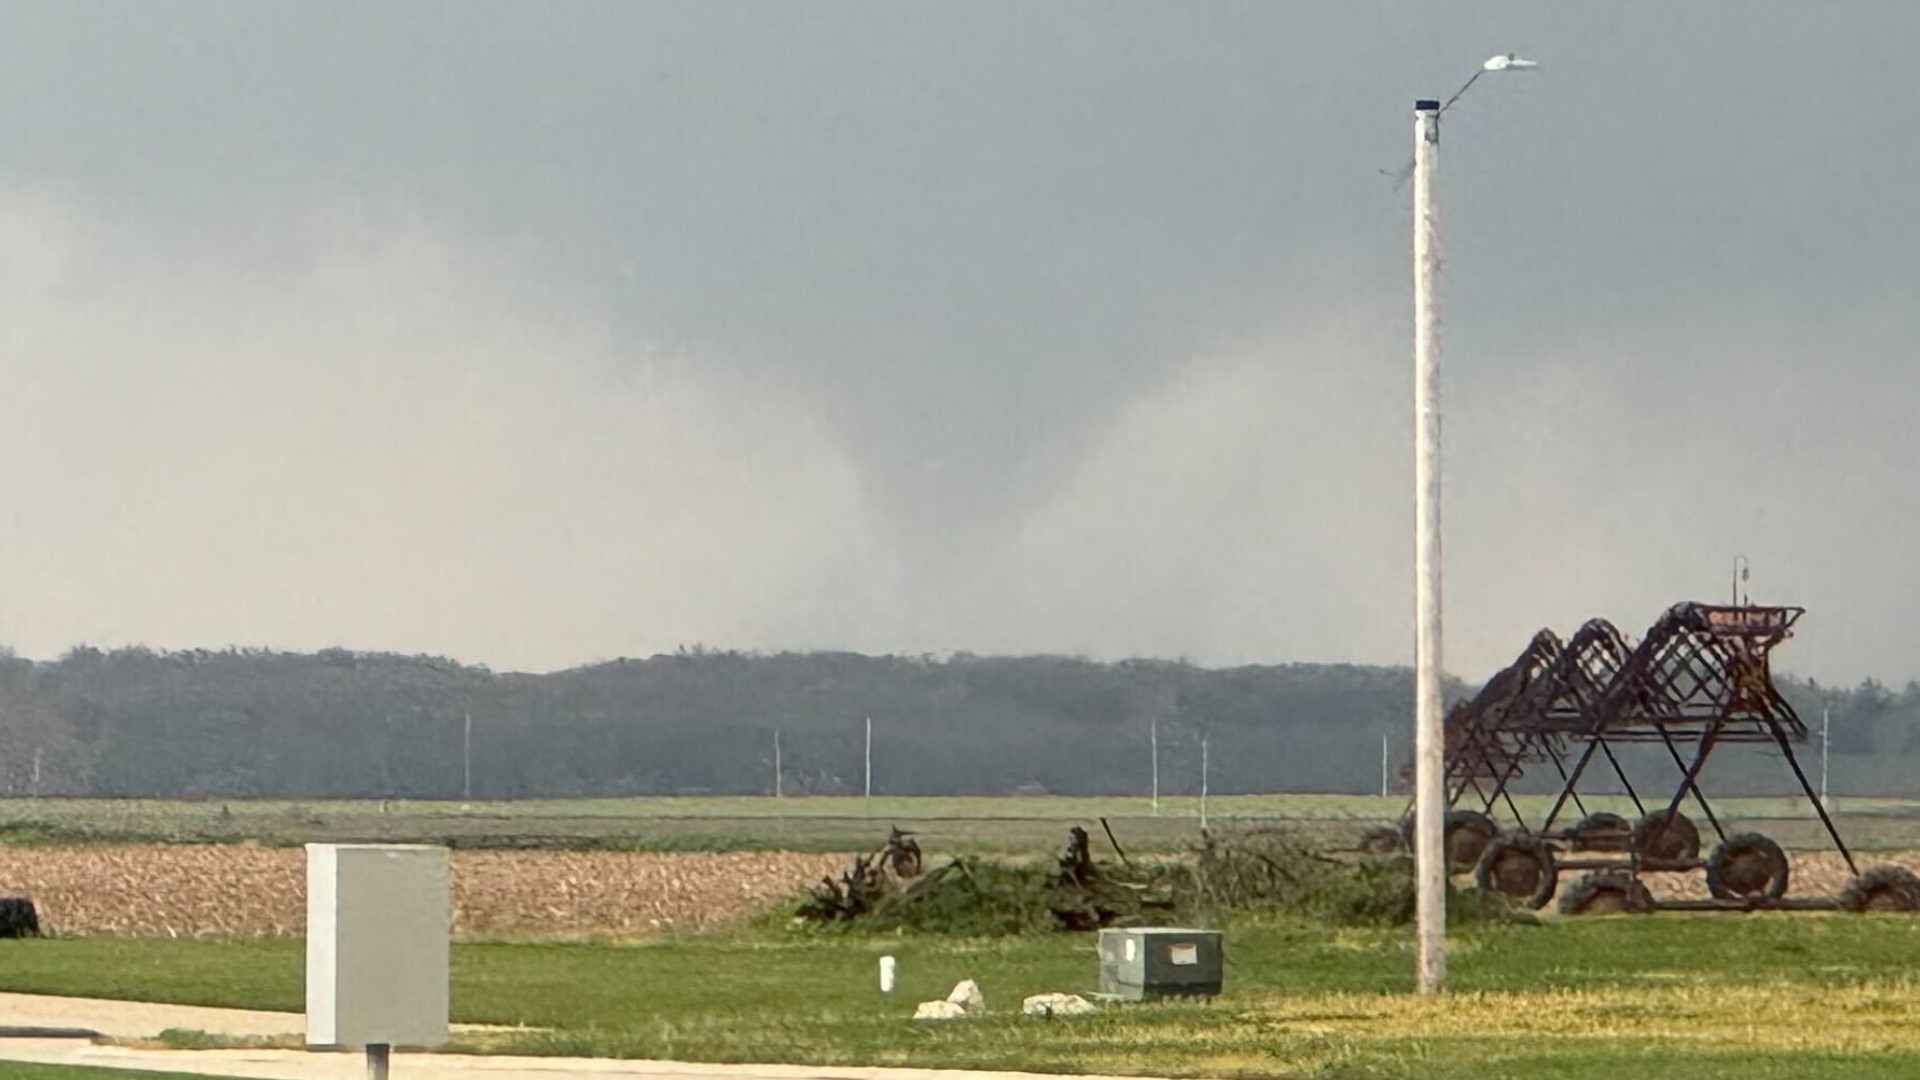 Iowa Gov. Kim Reynolds has issued a disaster proclamation after severe weather, including a tornado, moved through numerous counties on Tuesday, April 16.